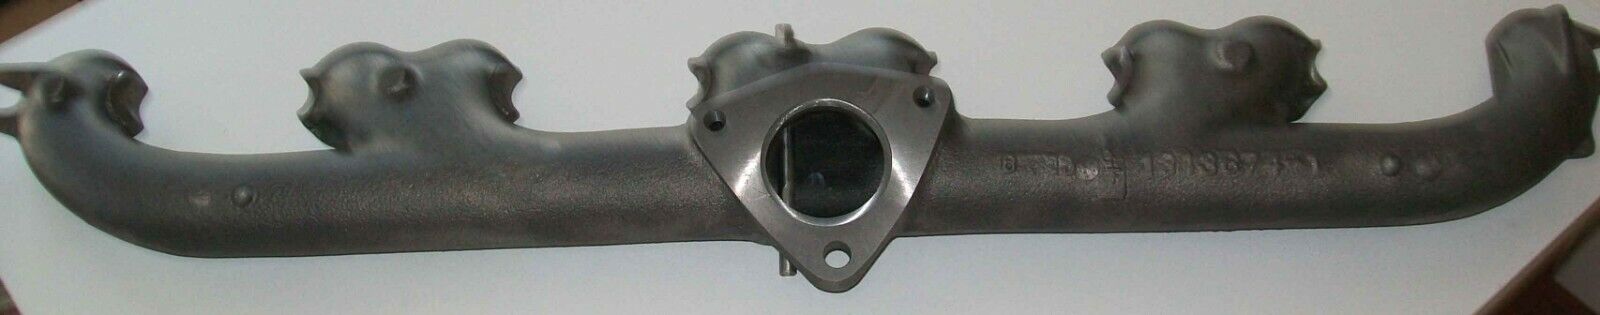 1939-1953 Buick Exhaust Manifold 248 & 263 cu.in Engines MADE in USA + Catalog